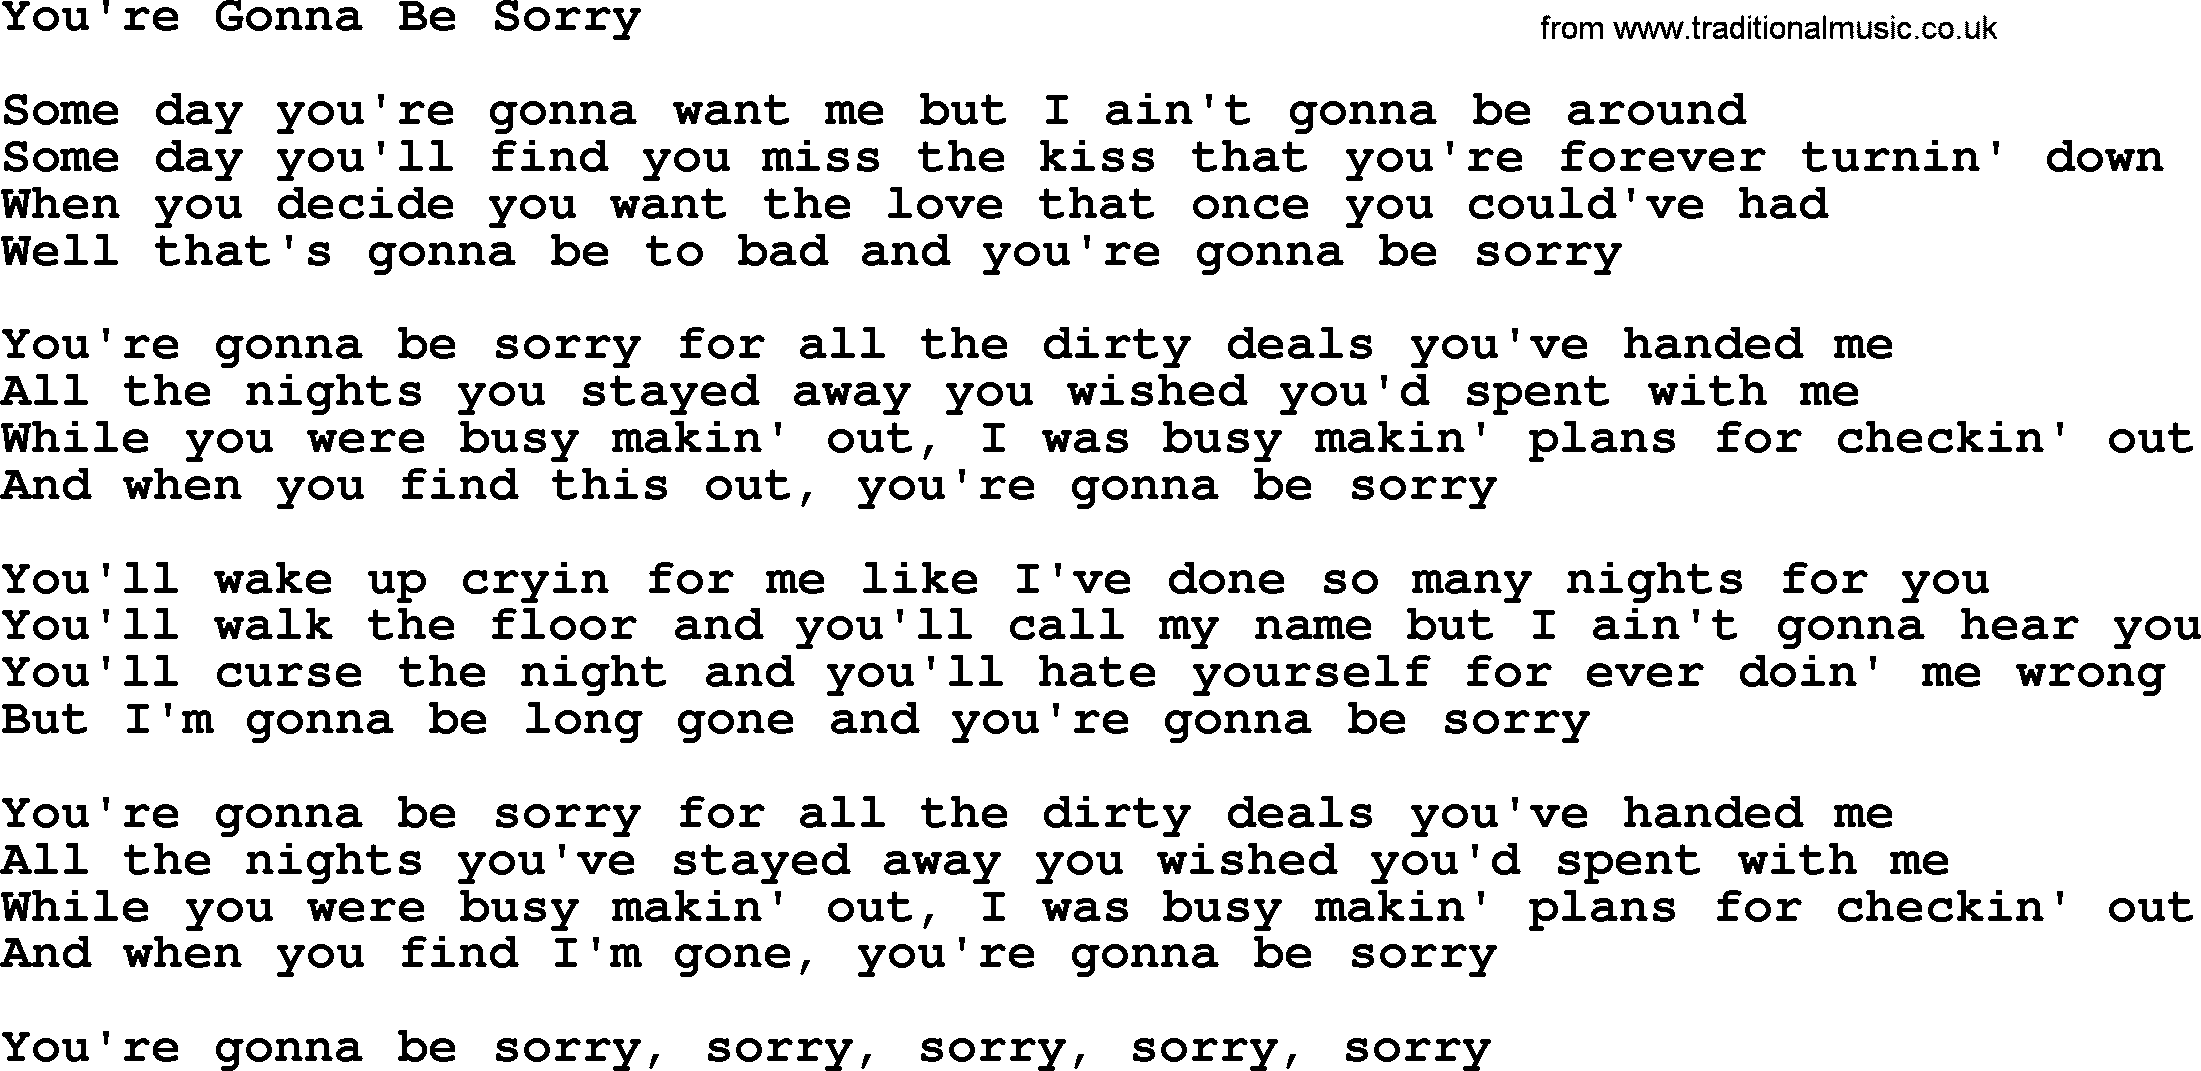 Dolly Parton song You're Gonna Be Sorry.txt lyrics